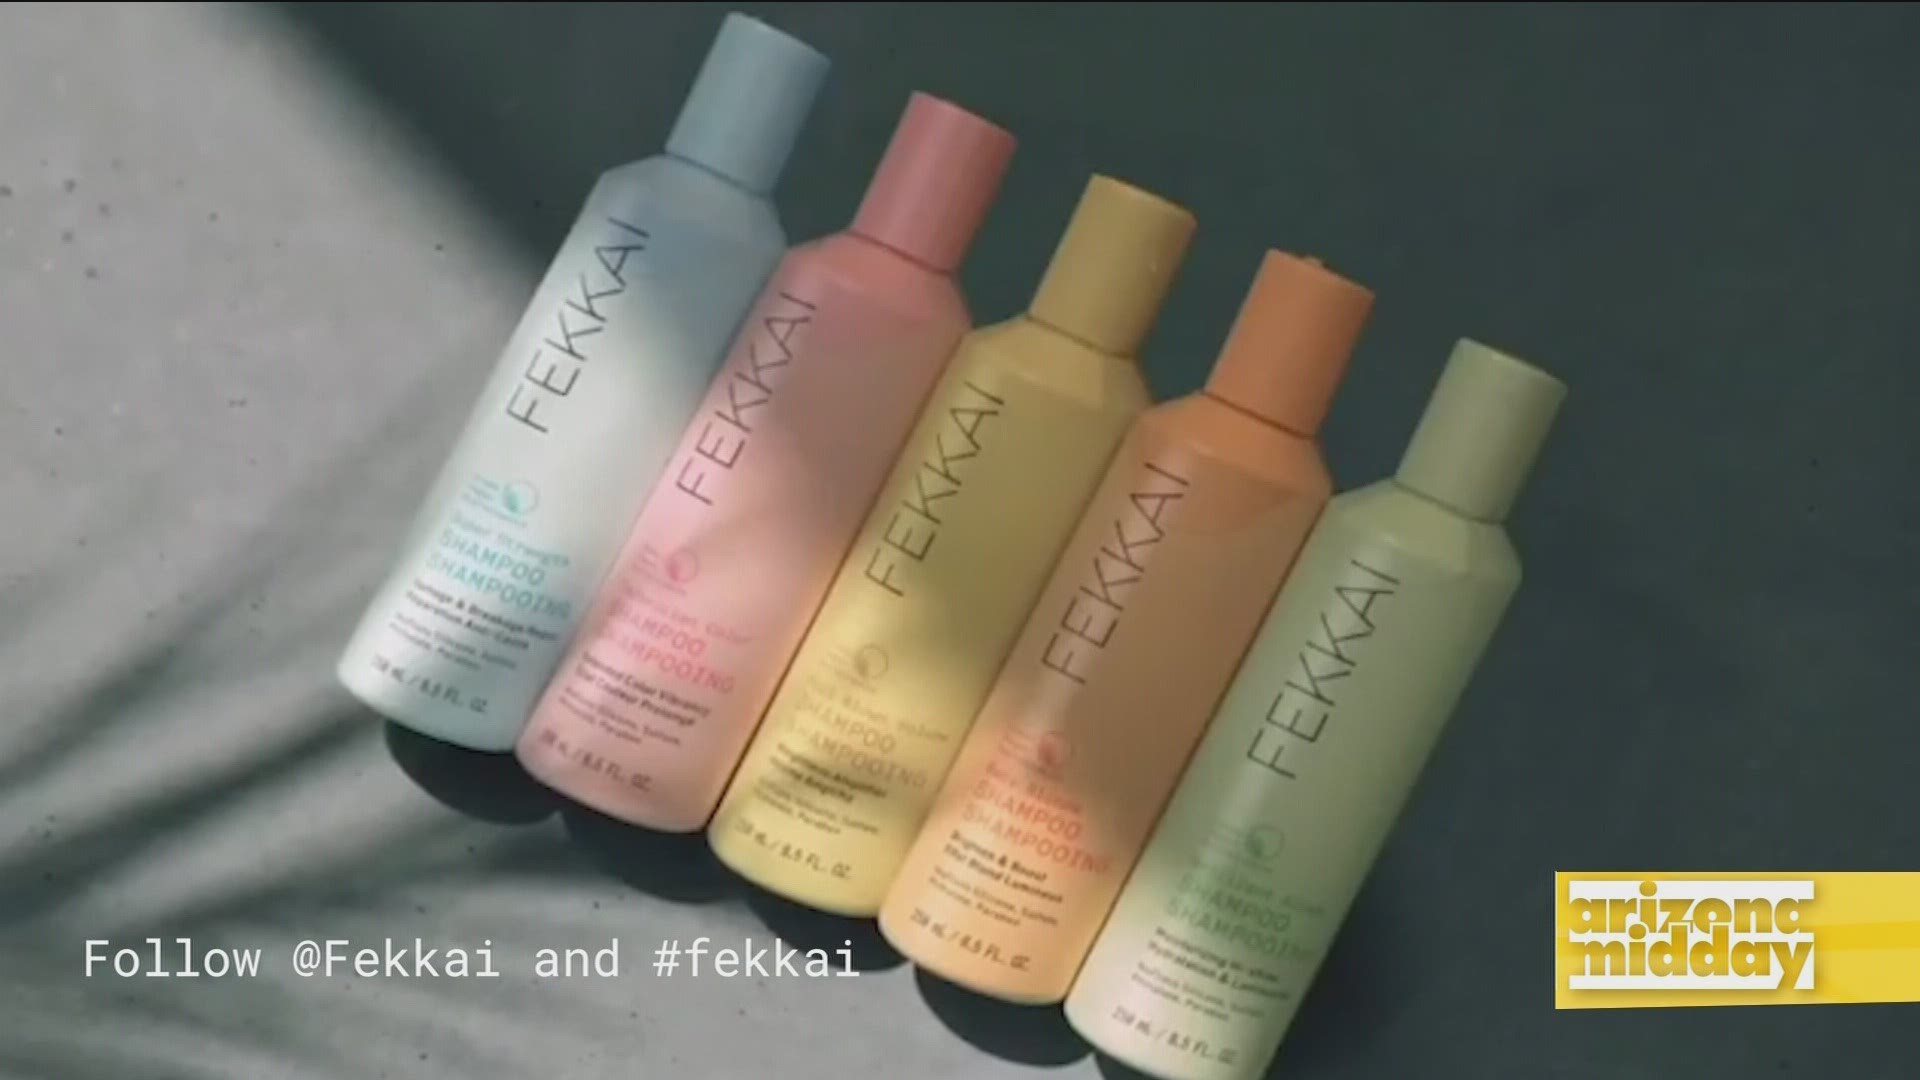 Lifestyle Editor, Joann Butler, shows us the best hair buys for fall with Fekkai